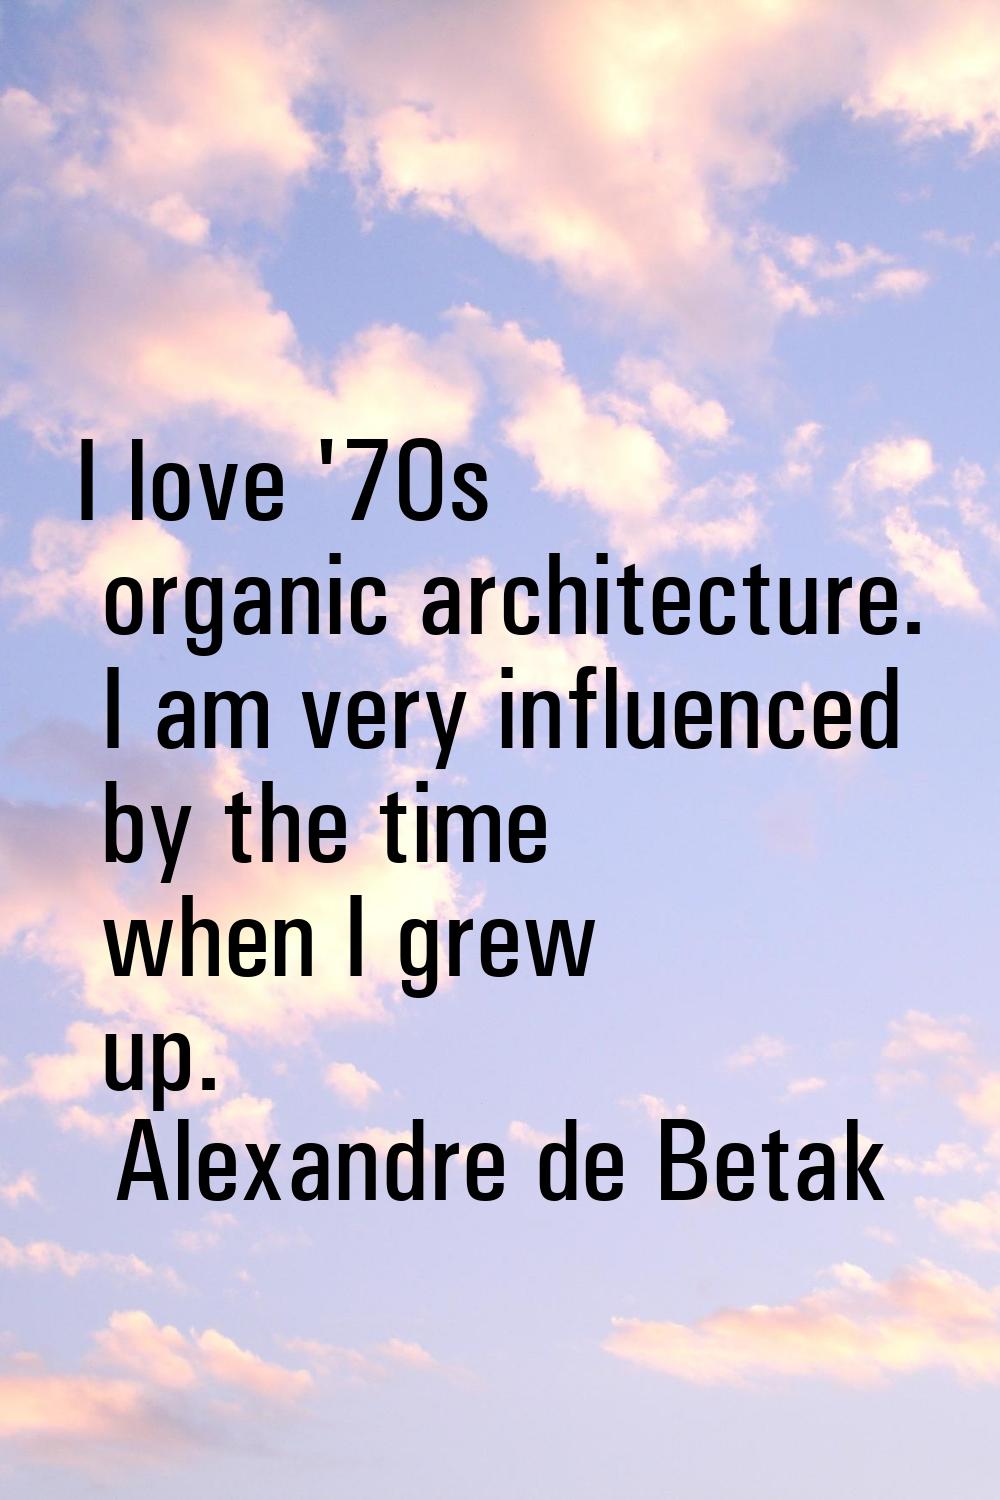 I love '70s organic architecture. I am very influenced by the time when I grew up.